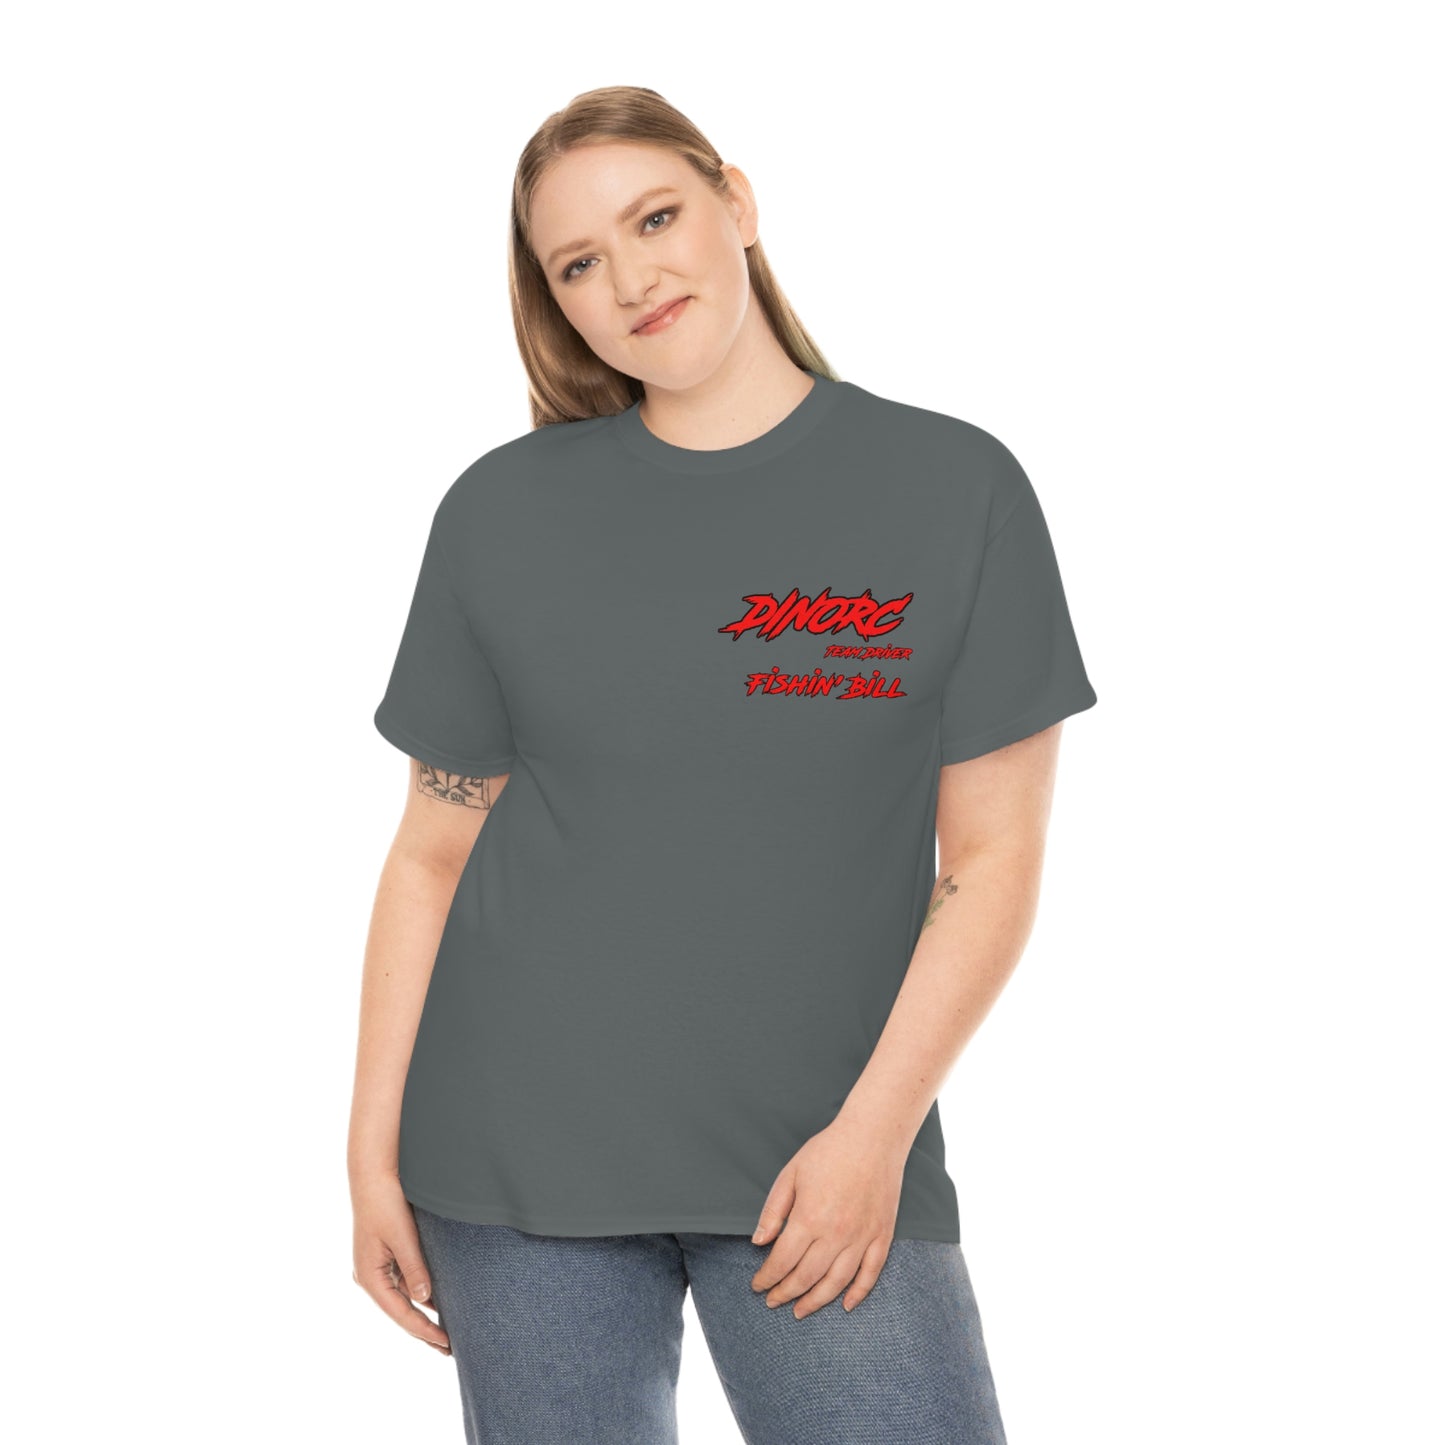 Team Driver Fishin' Bill Front and Back DinoRc Logo T-Shirt S-5x 5 colors